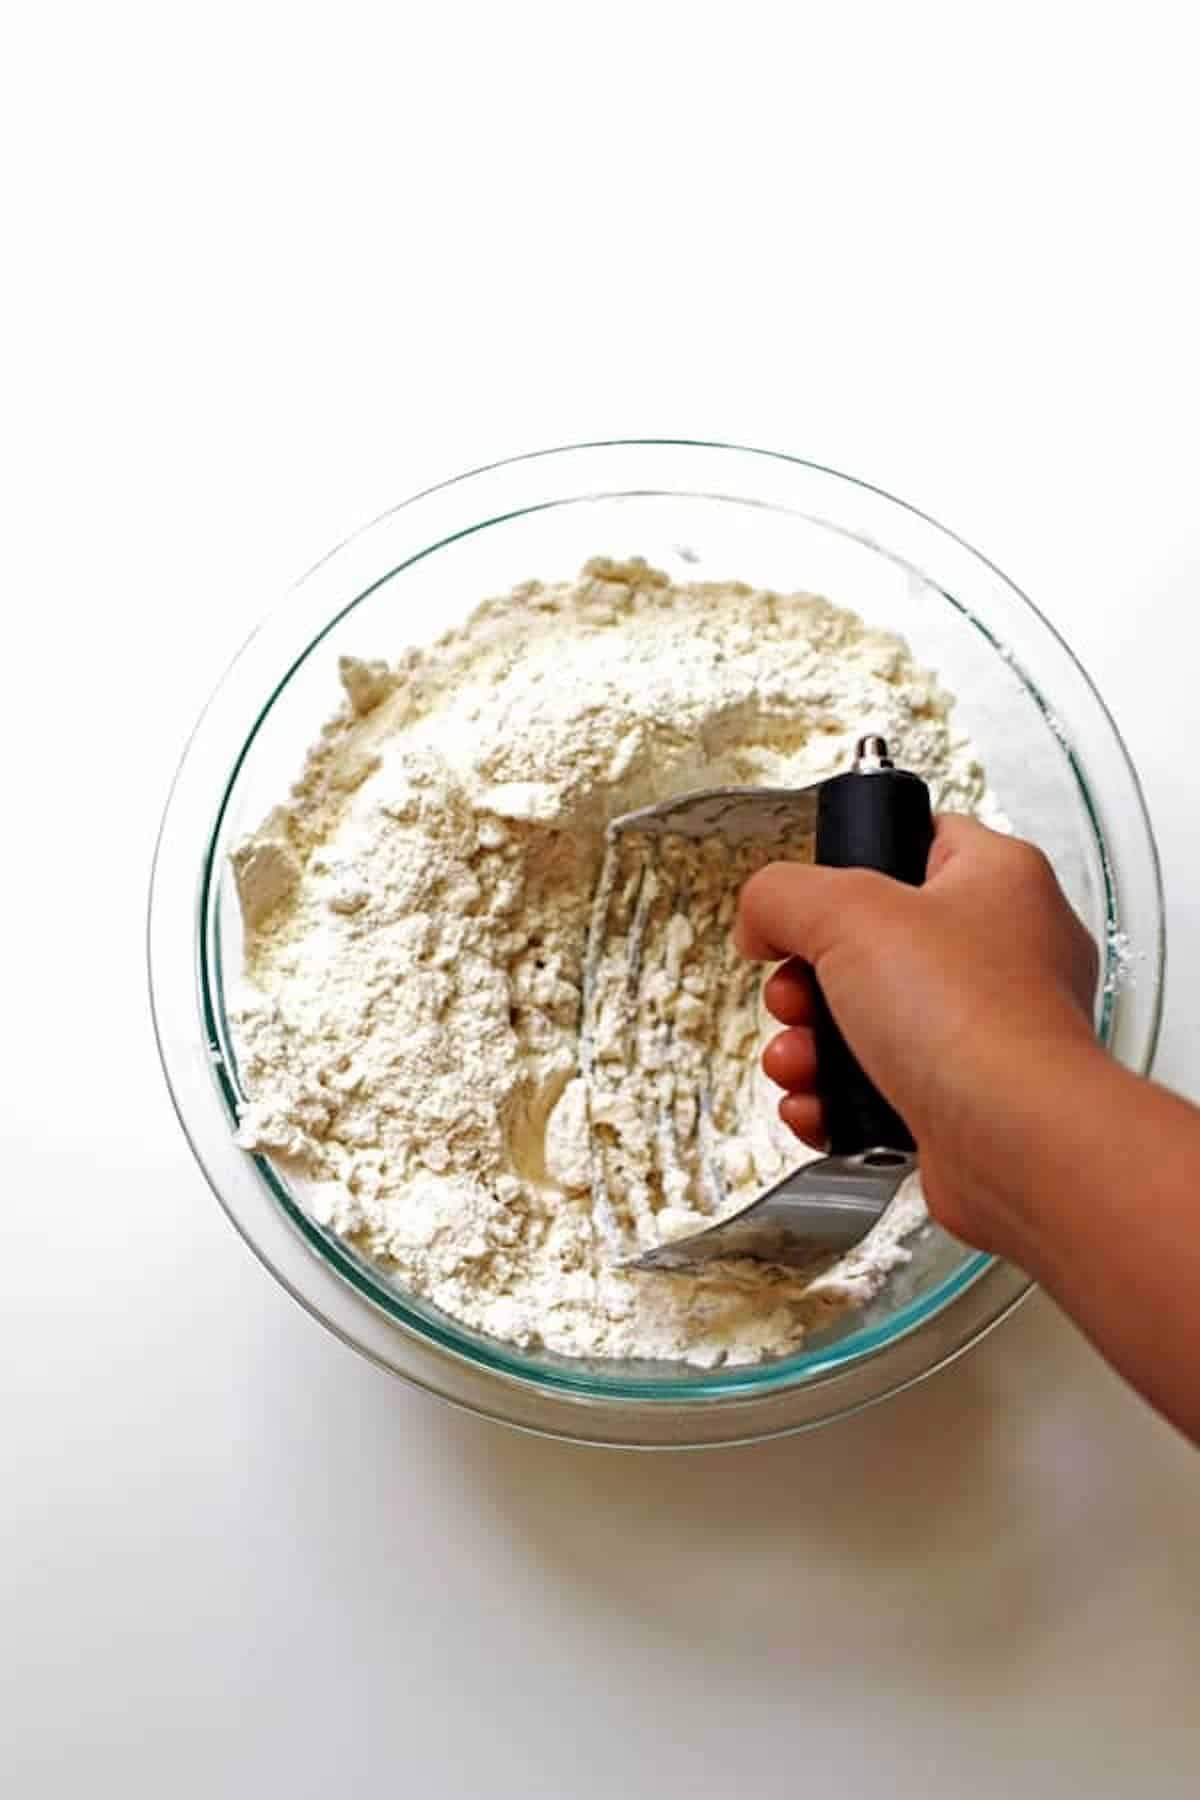 Combining flour with other dry ingredients with a pastry blender